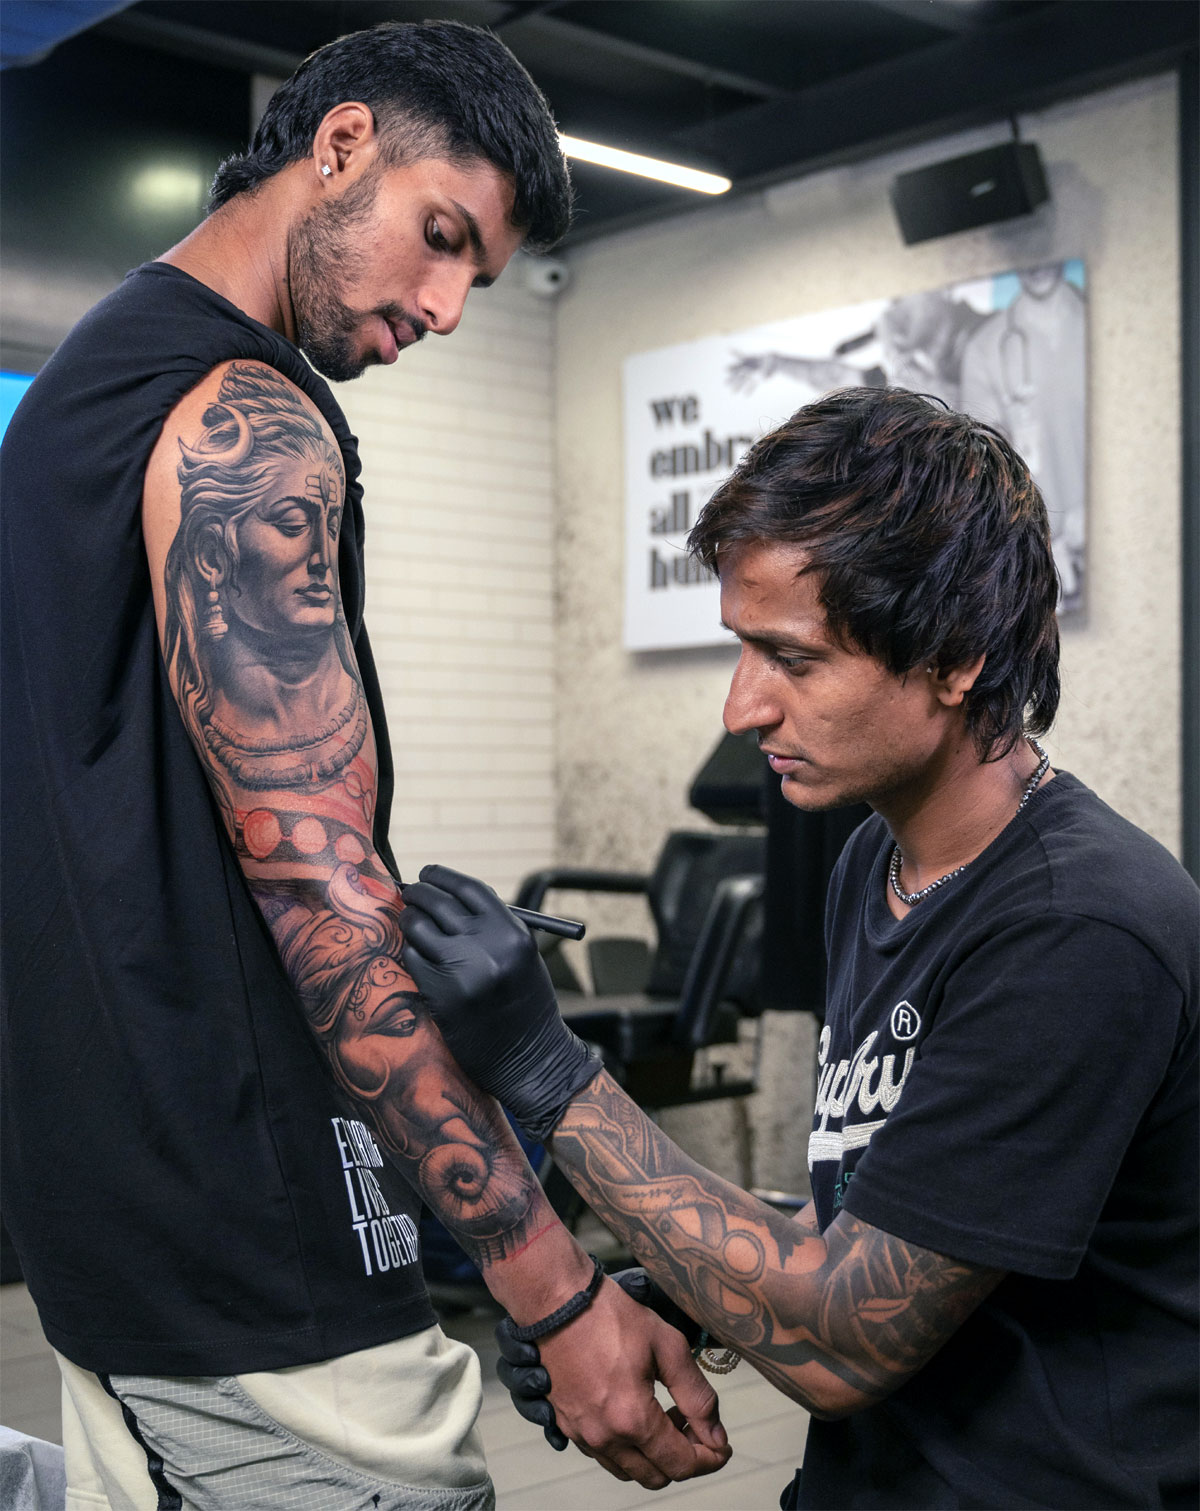 Why cricketers have tattoos on their body ? - Quora